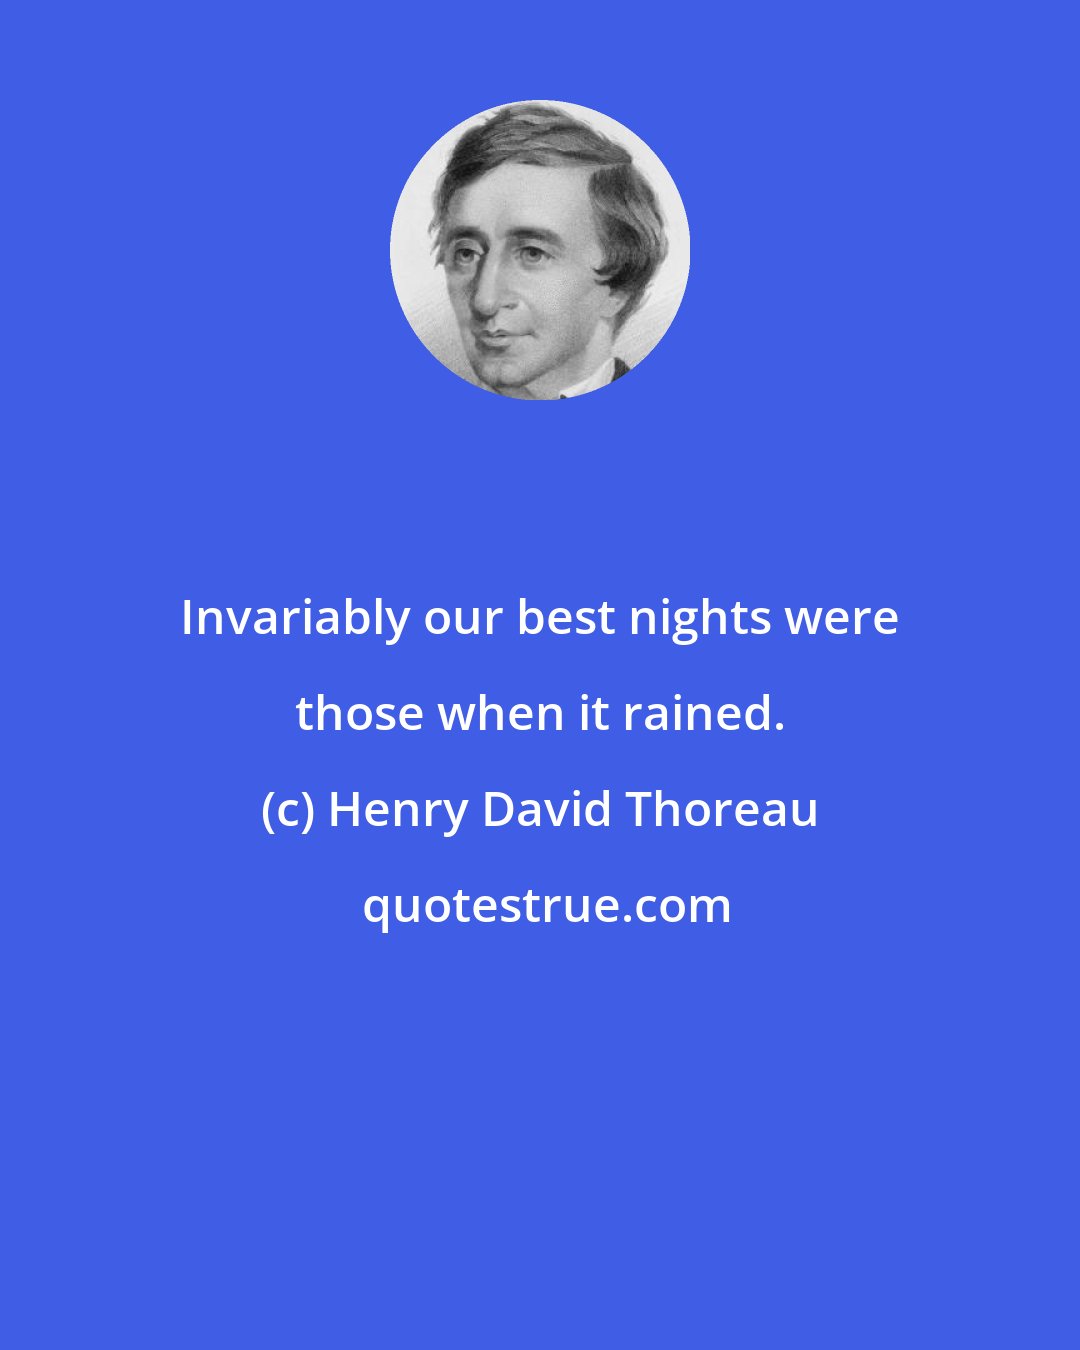 Henry David Thoreau: Invariably our best nights were those when it rained.